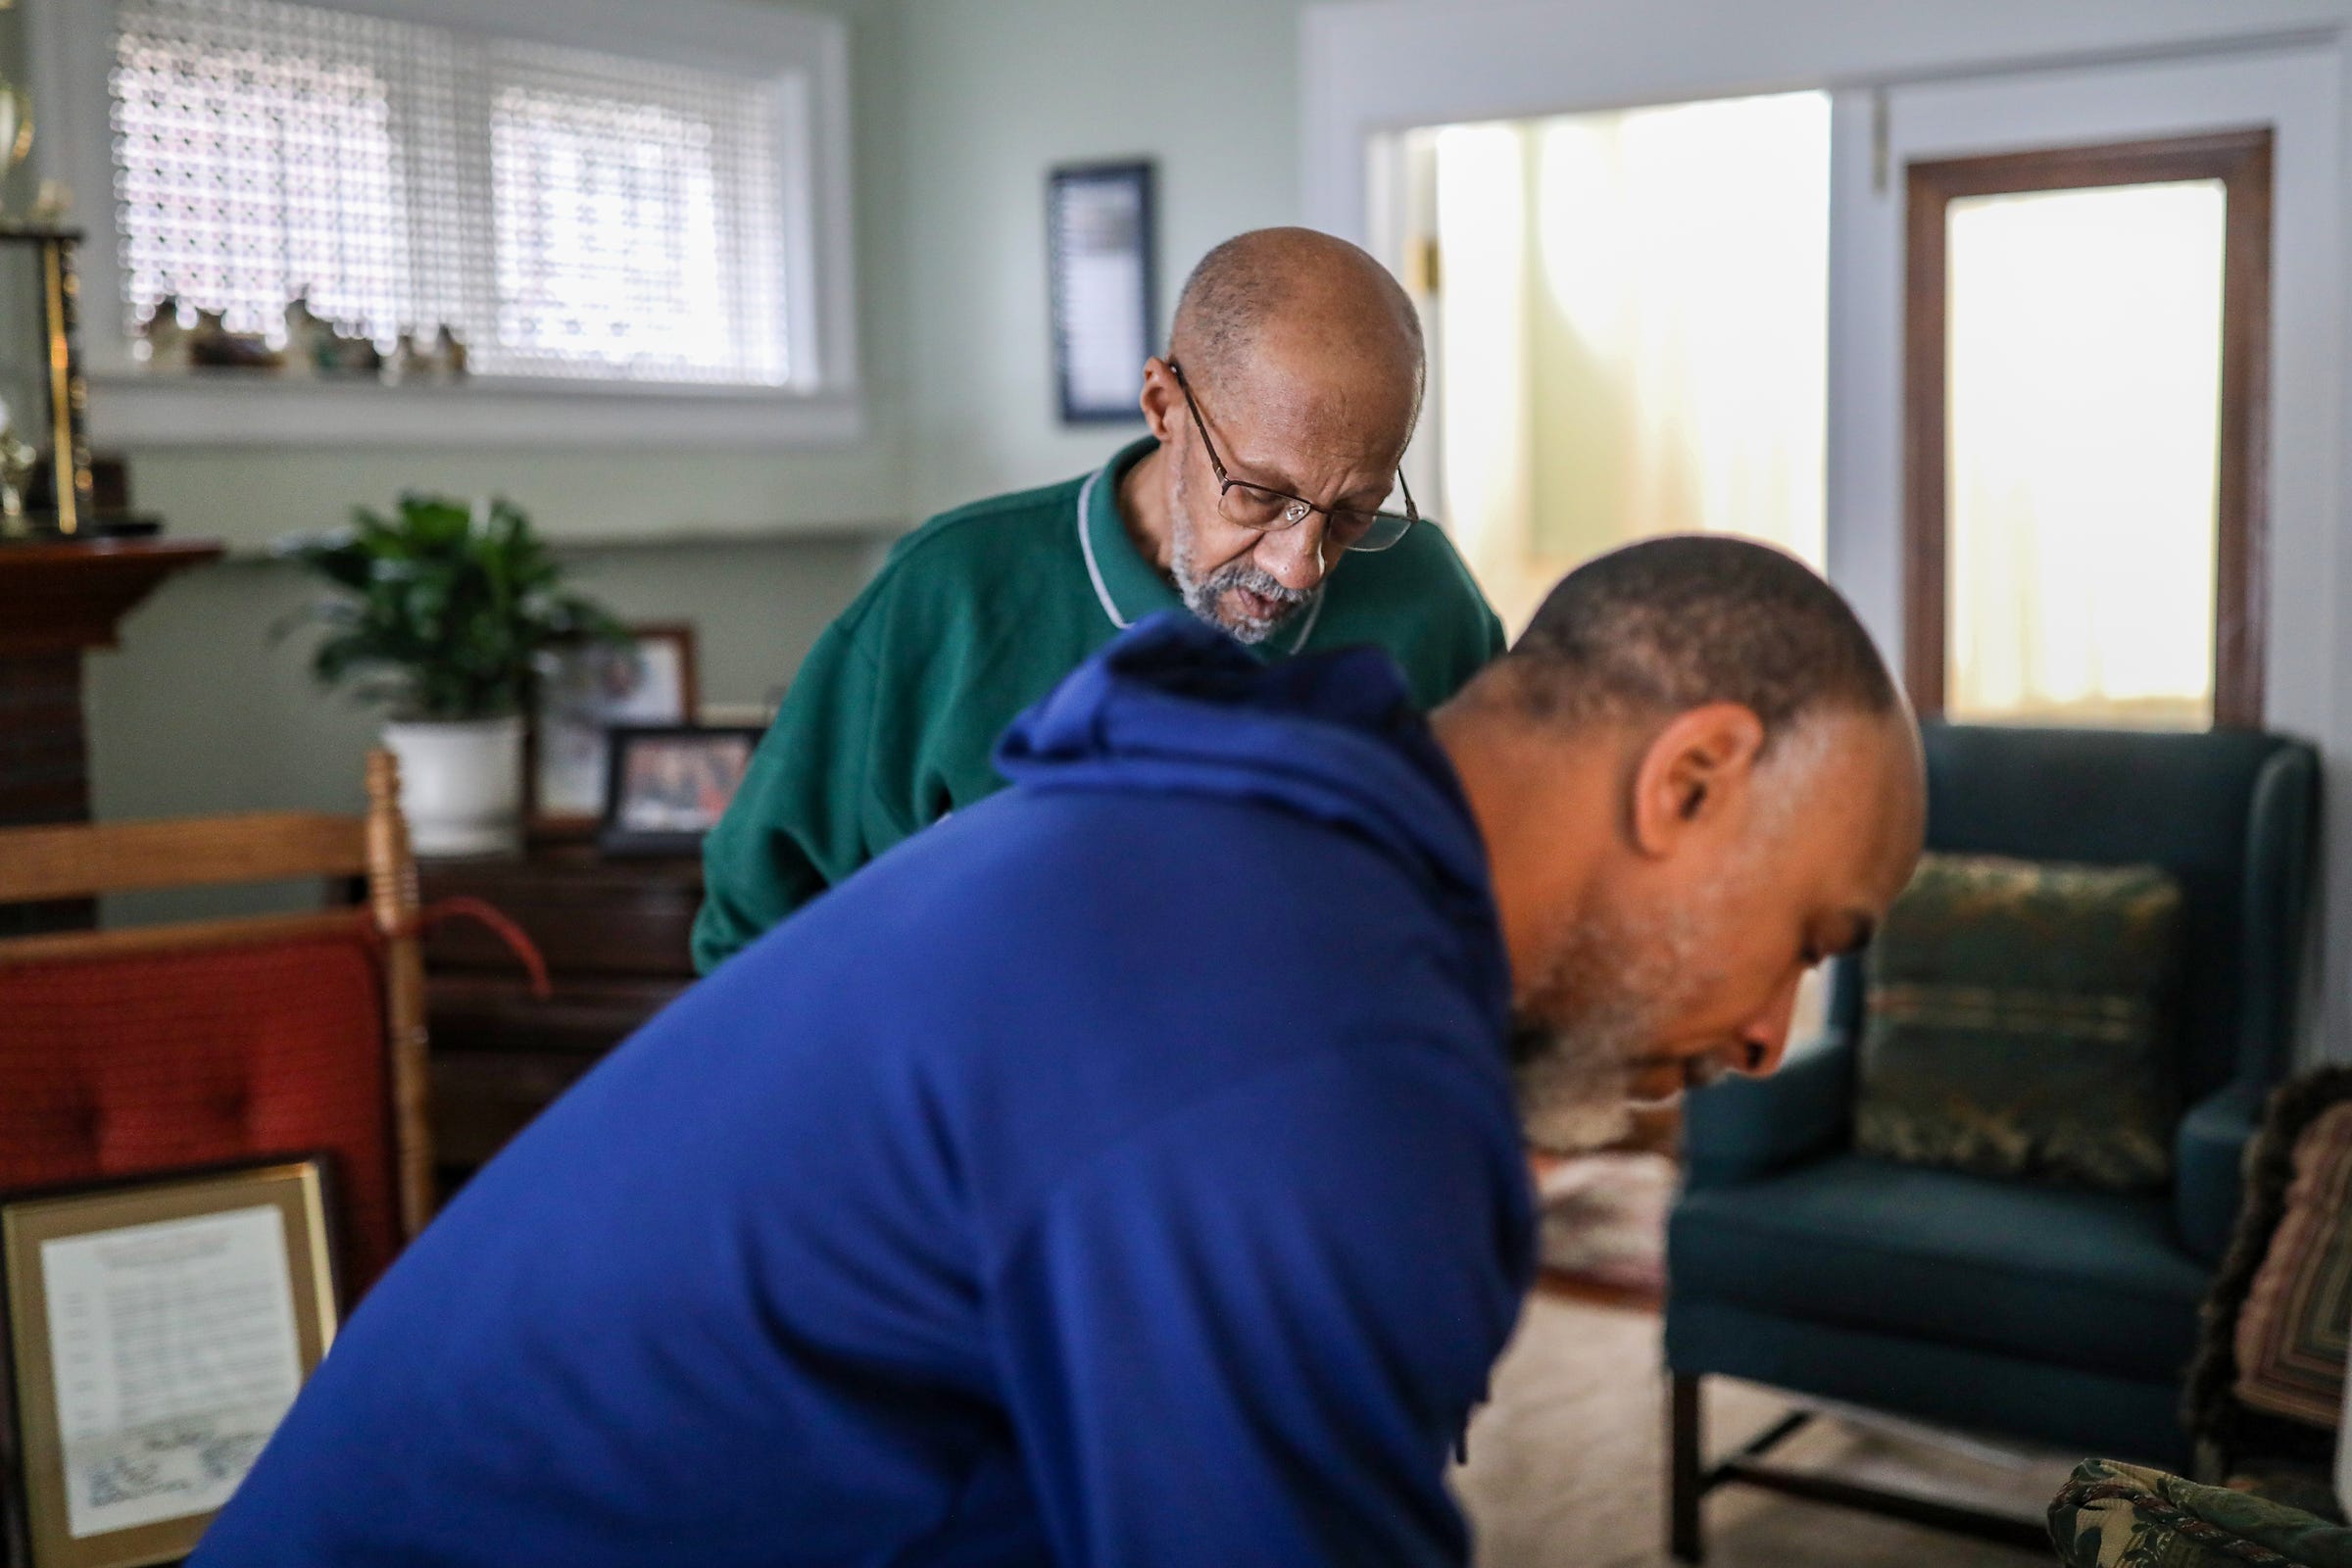 Adrian Ponder, 73, of Royal Oak looks through his late Aunt Vivan McLaughlin's things at her home with her grandson Jonathan McLaughlin in Detroit on Tuesday, Feb. 8, 2022. Ponder retired from the Detroit Police Department in 1986 after witnessing his partner being shot and killed on duty. Suffering from Post Traumatic Stress Disorder, Ponder's relationship through the years with McLaughlin has helped him to heal to the point where he can perform his security job today at Wayne State University.